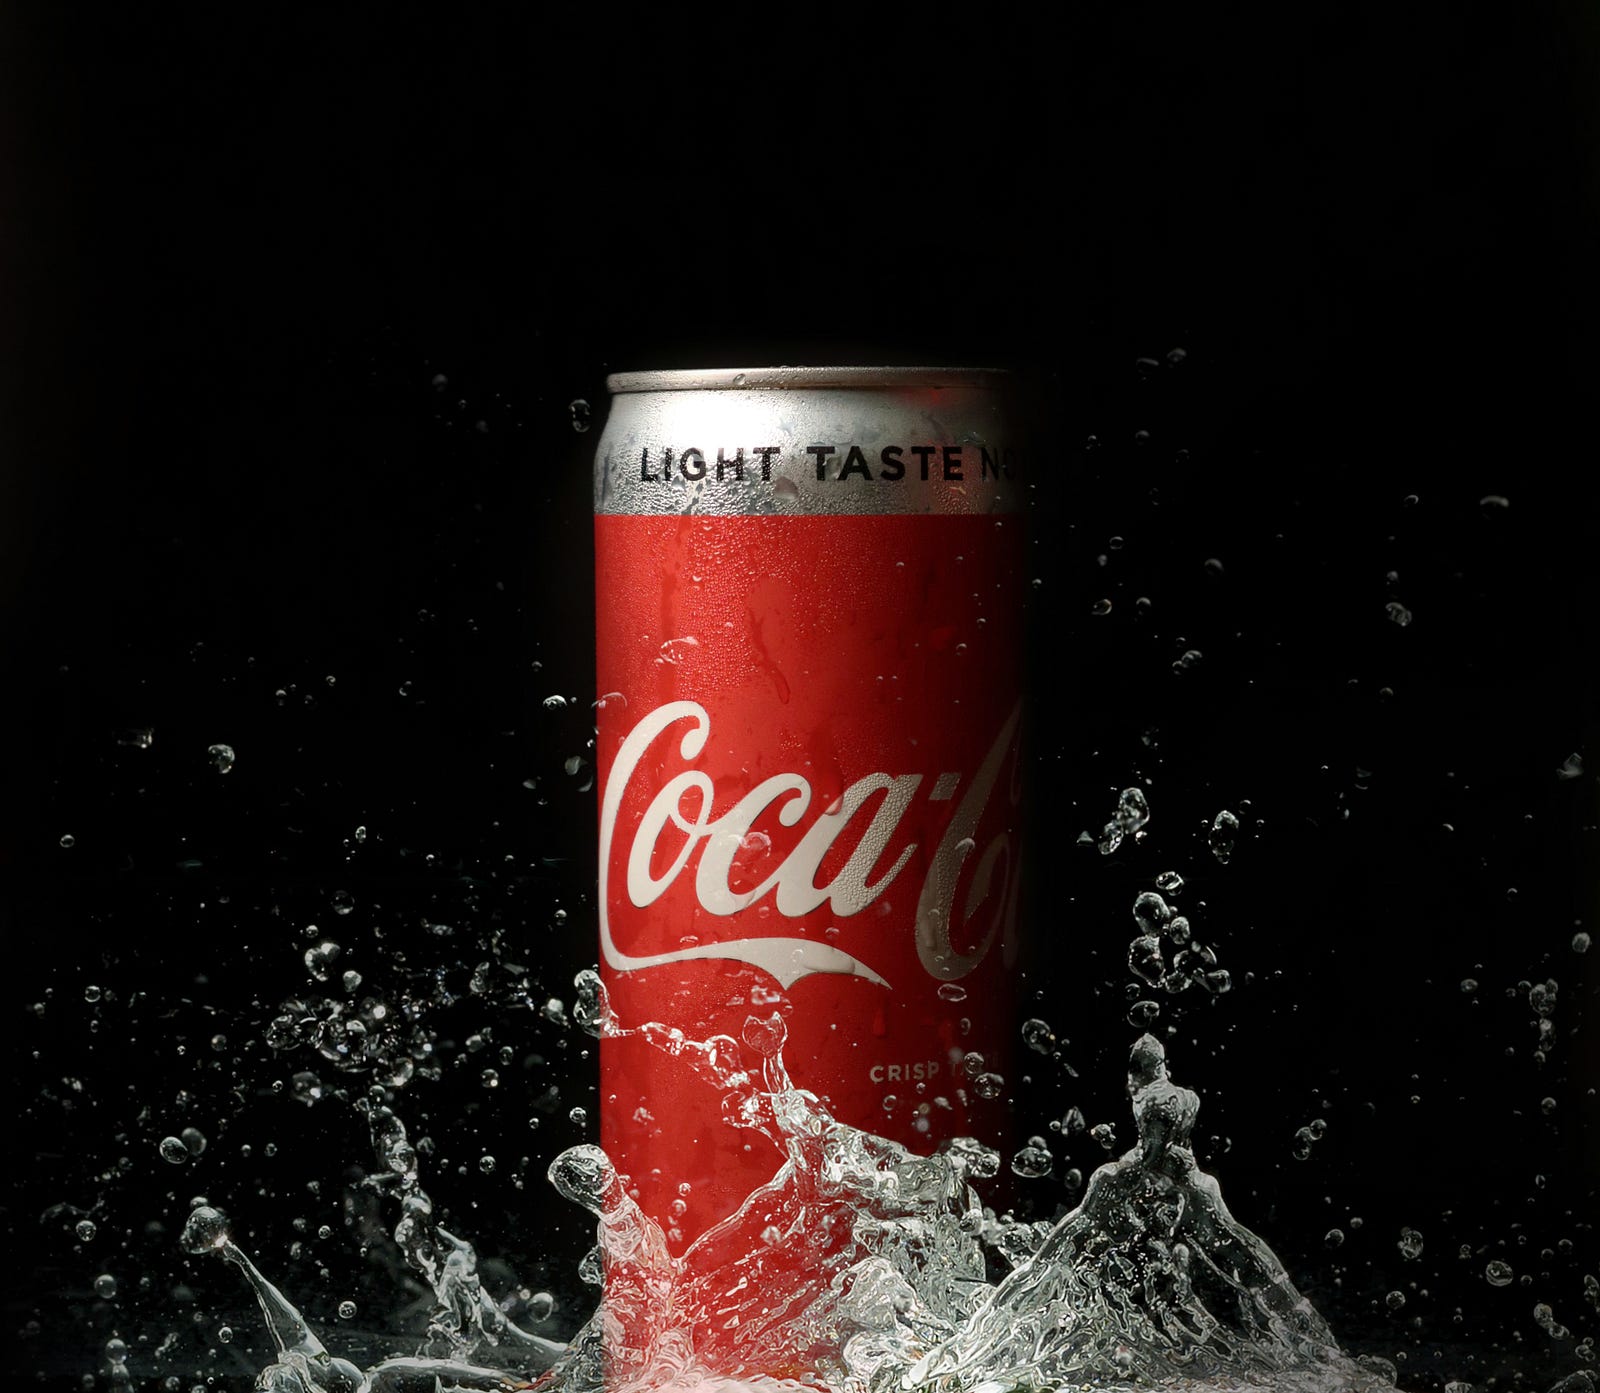 A can oc Coca-Cola has water splashing up around it. Sugary drinks (sugar-sweetened beverages or “soft” drinks) are any beverage with added sugar or other sweeteners (such as sucrose, high fructose corn syrup, fruit juice concentrates, and more).